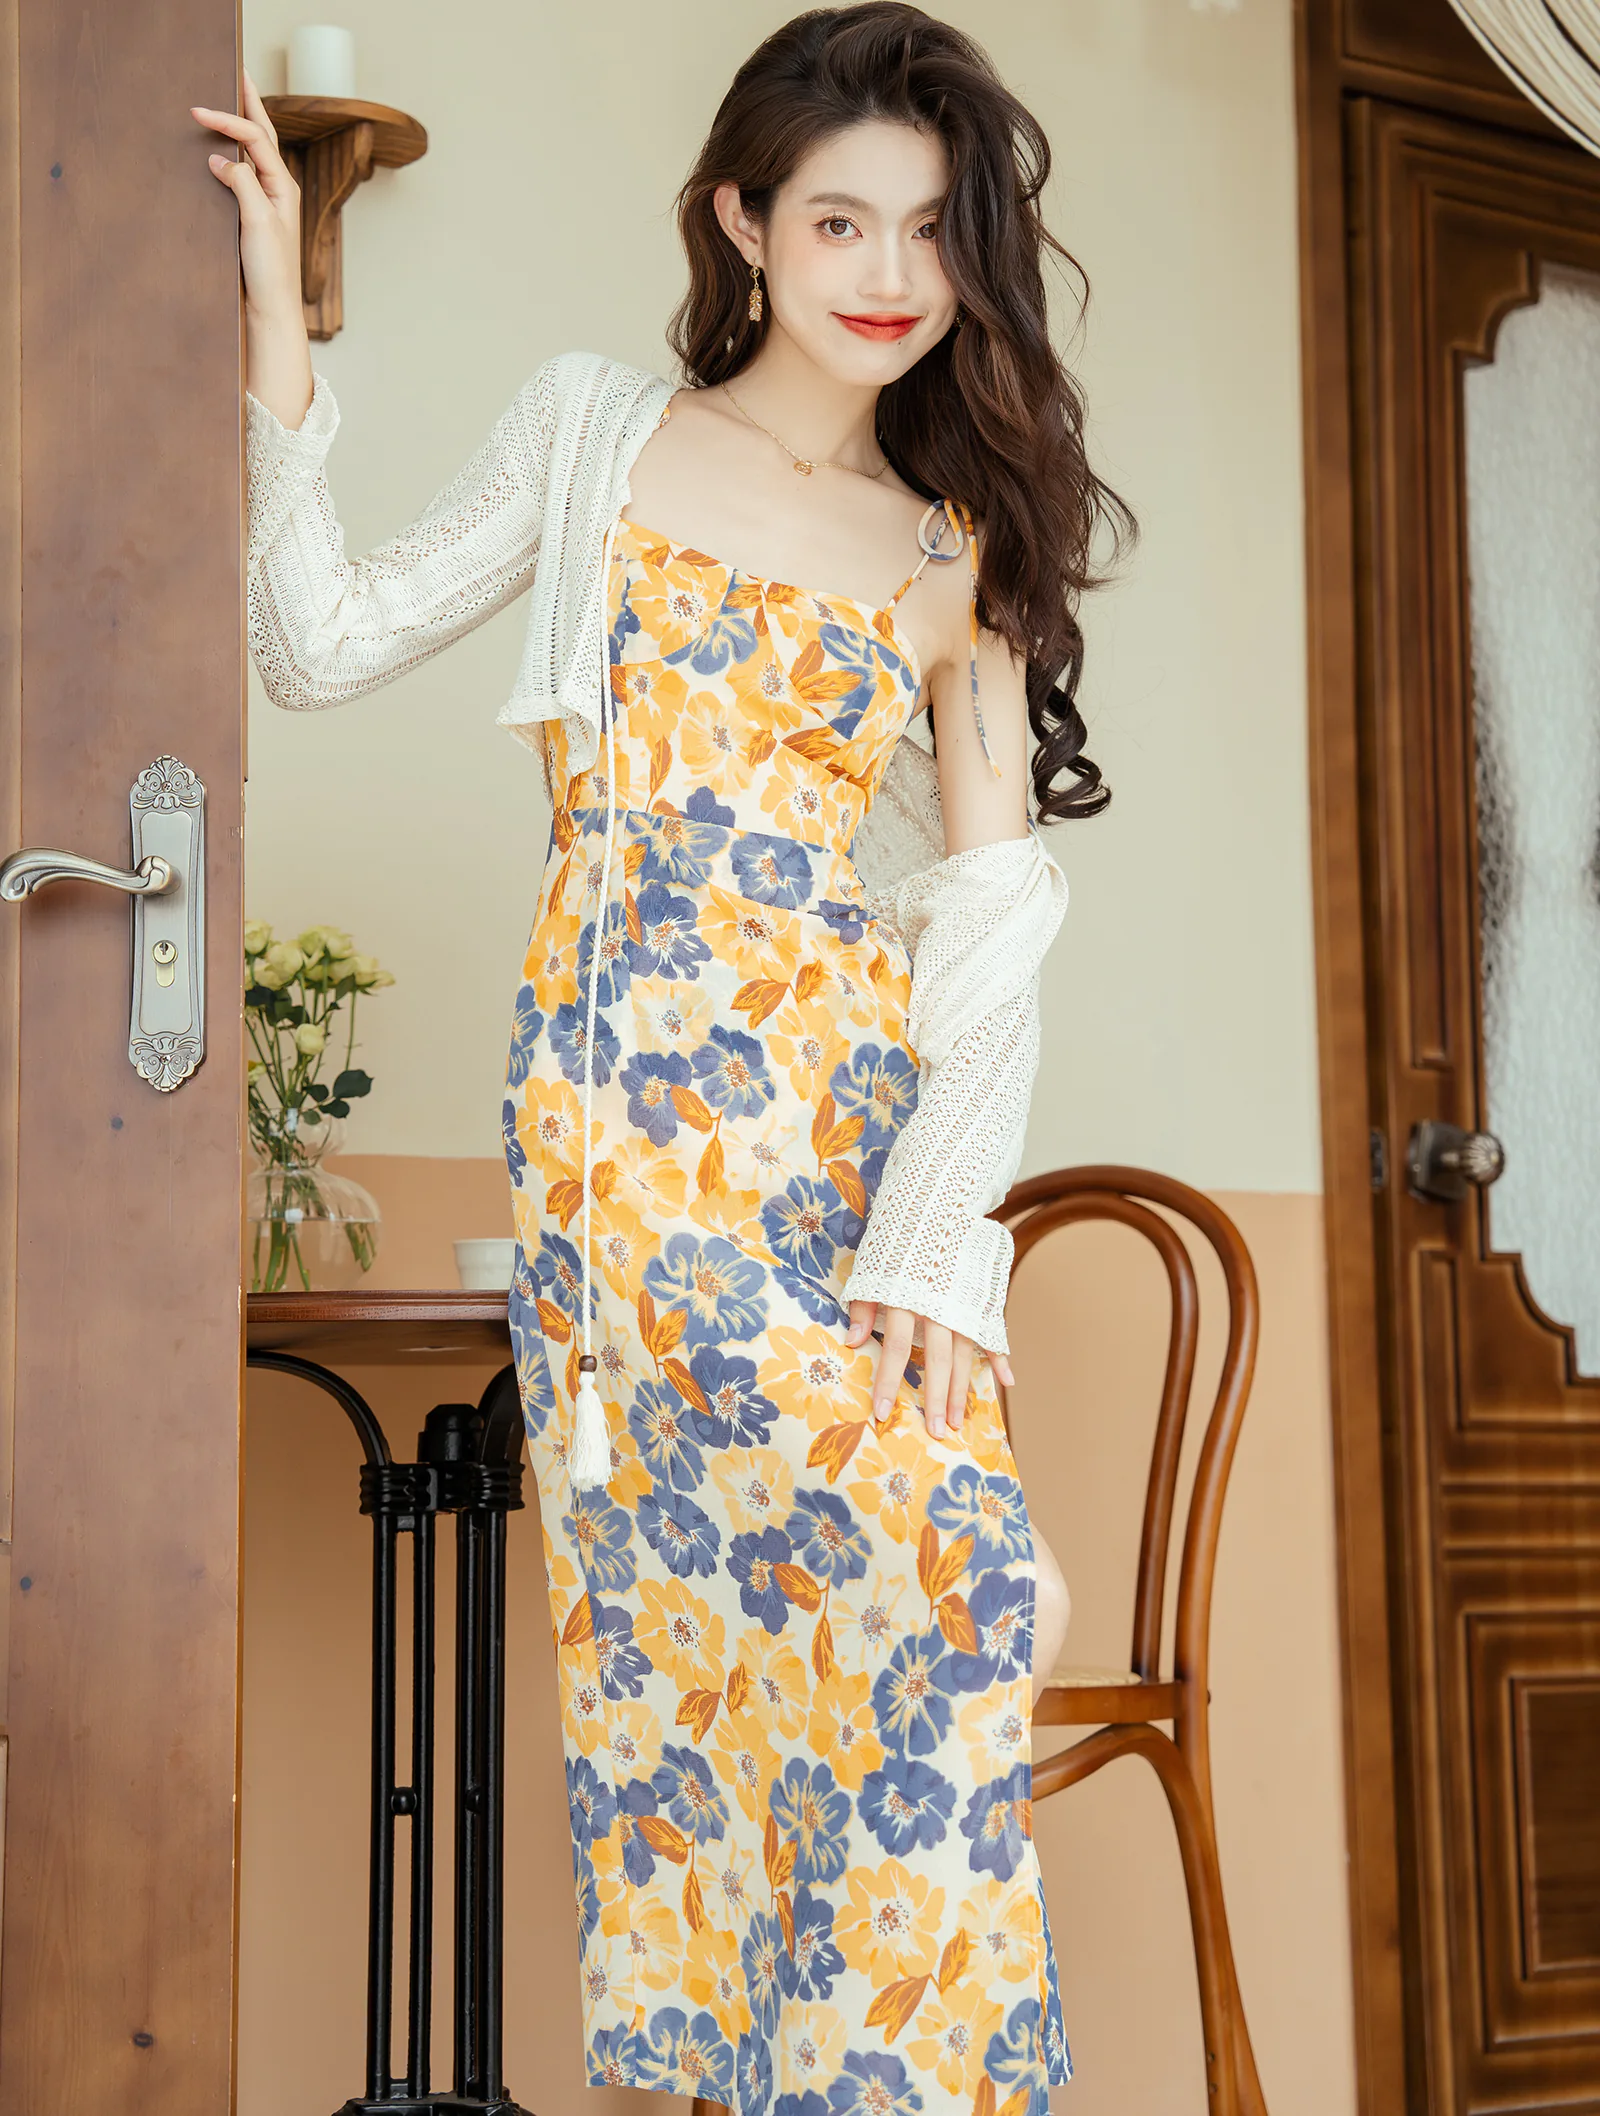 Sweet Floral Printed Yellow Summer Beach Slip Dress with Knit Cardigan04